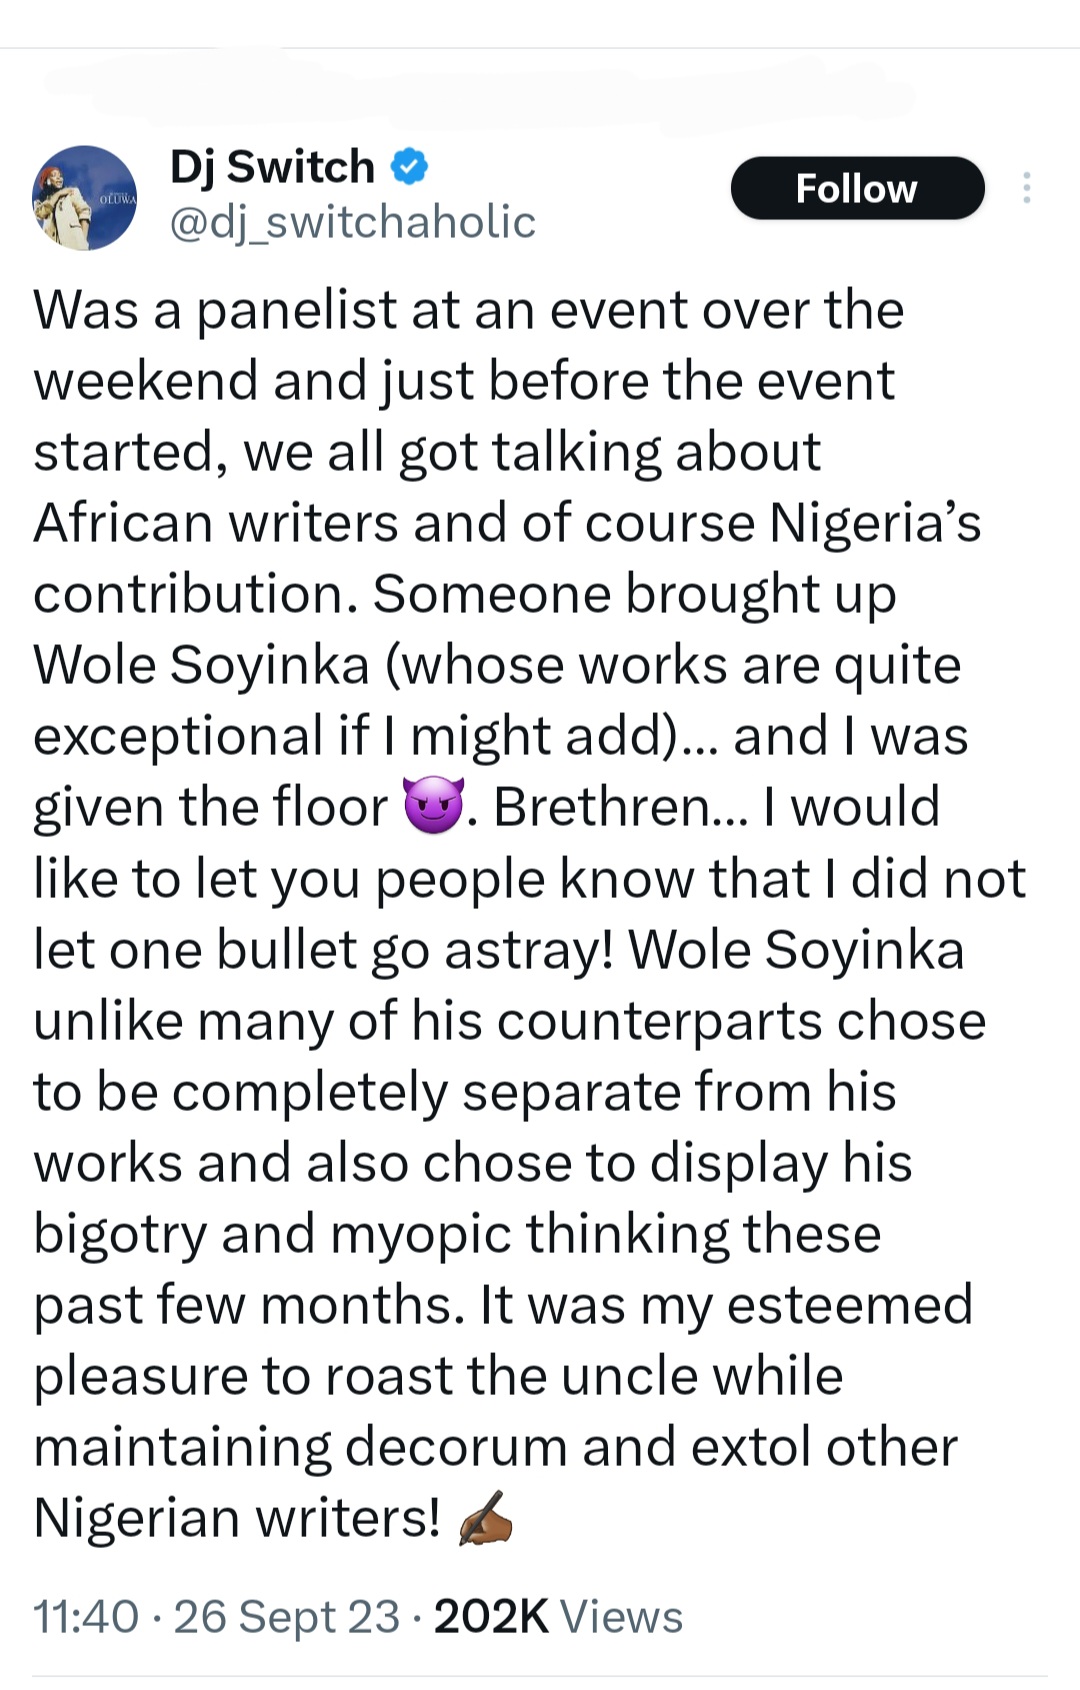 DJ Switch boasts about "roasting" Wole Soyinka during a panel discussion